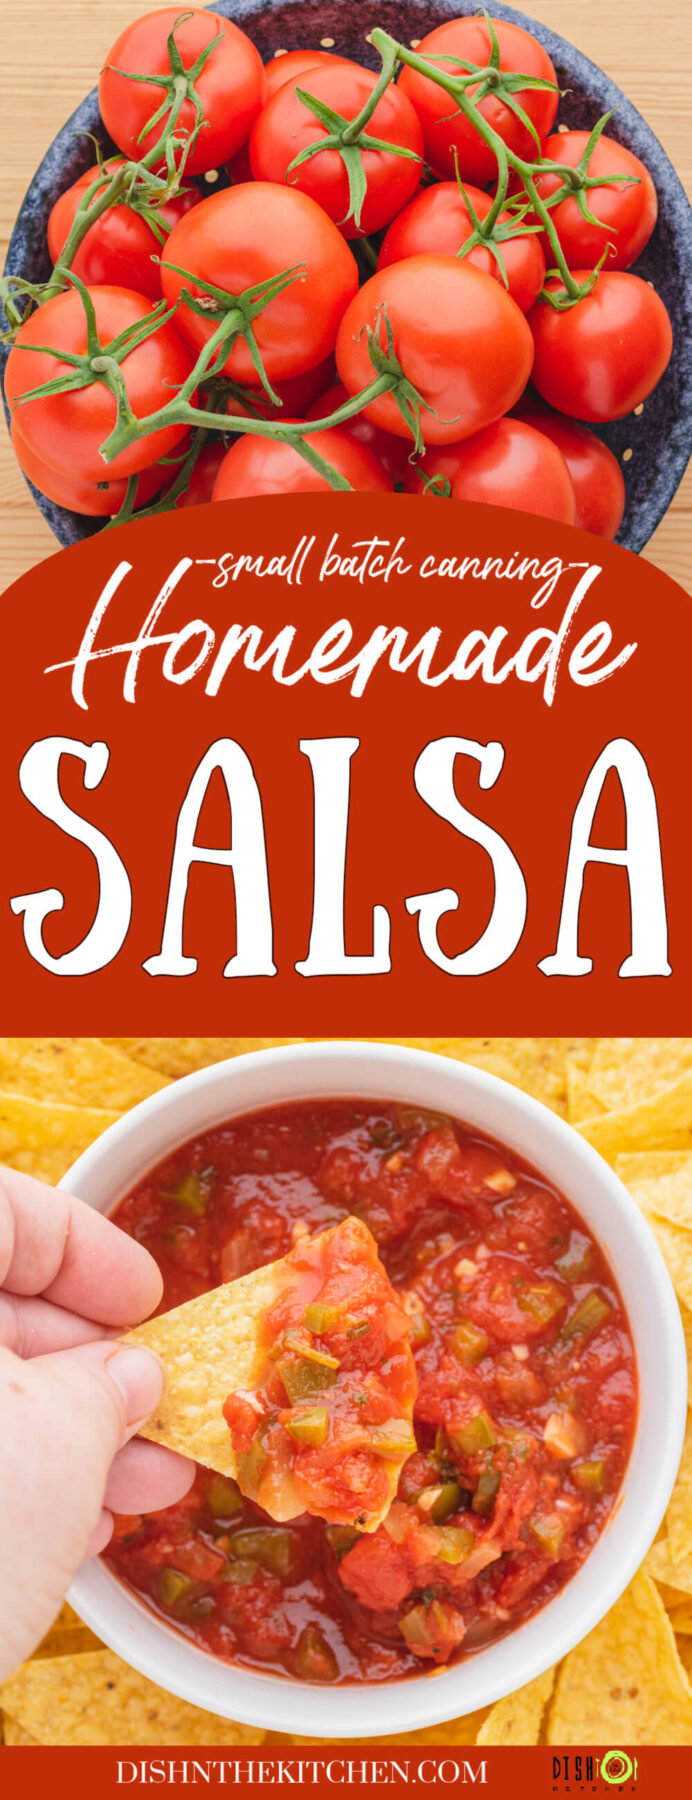 Pinterest image featuring a bowl of ripe red tomatoes over a bowl of salsa with a tortilla chip.